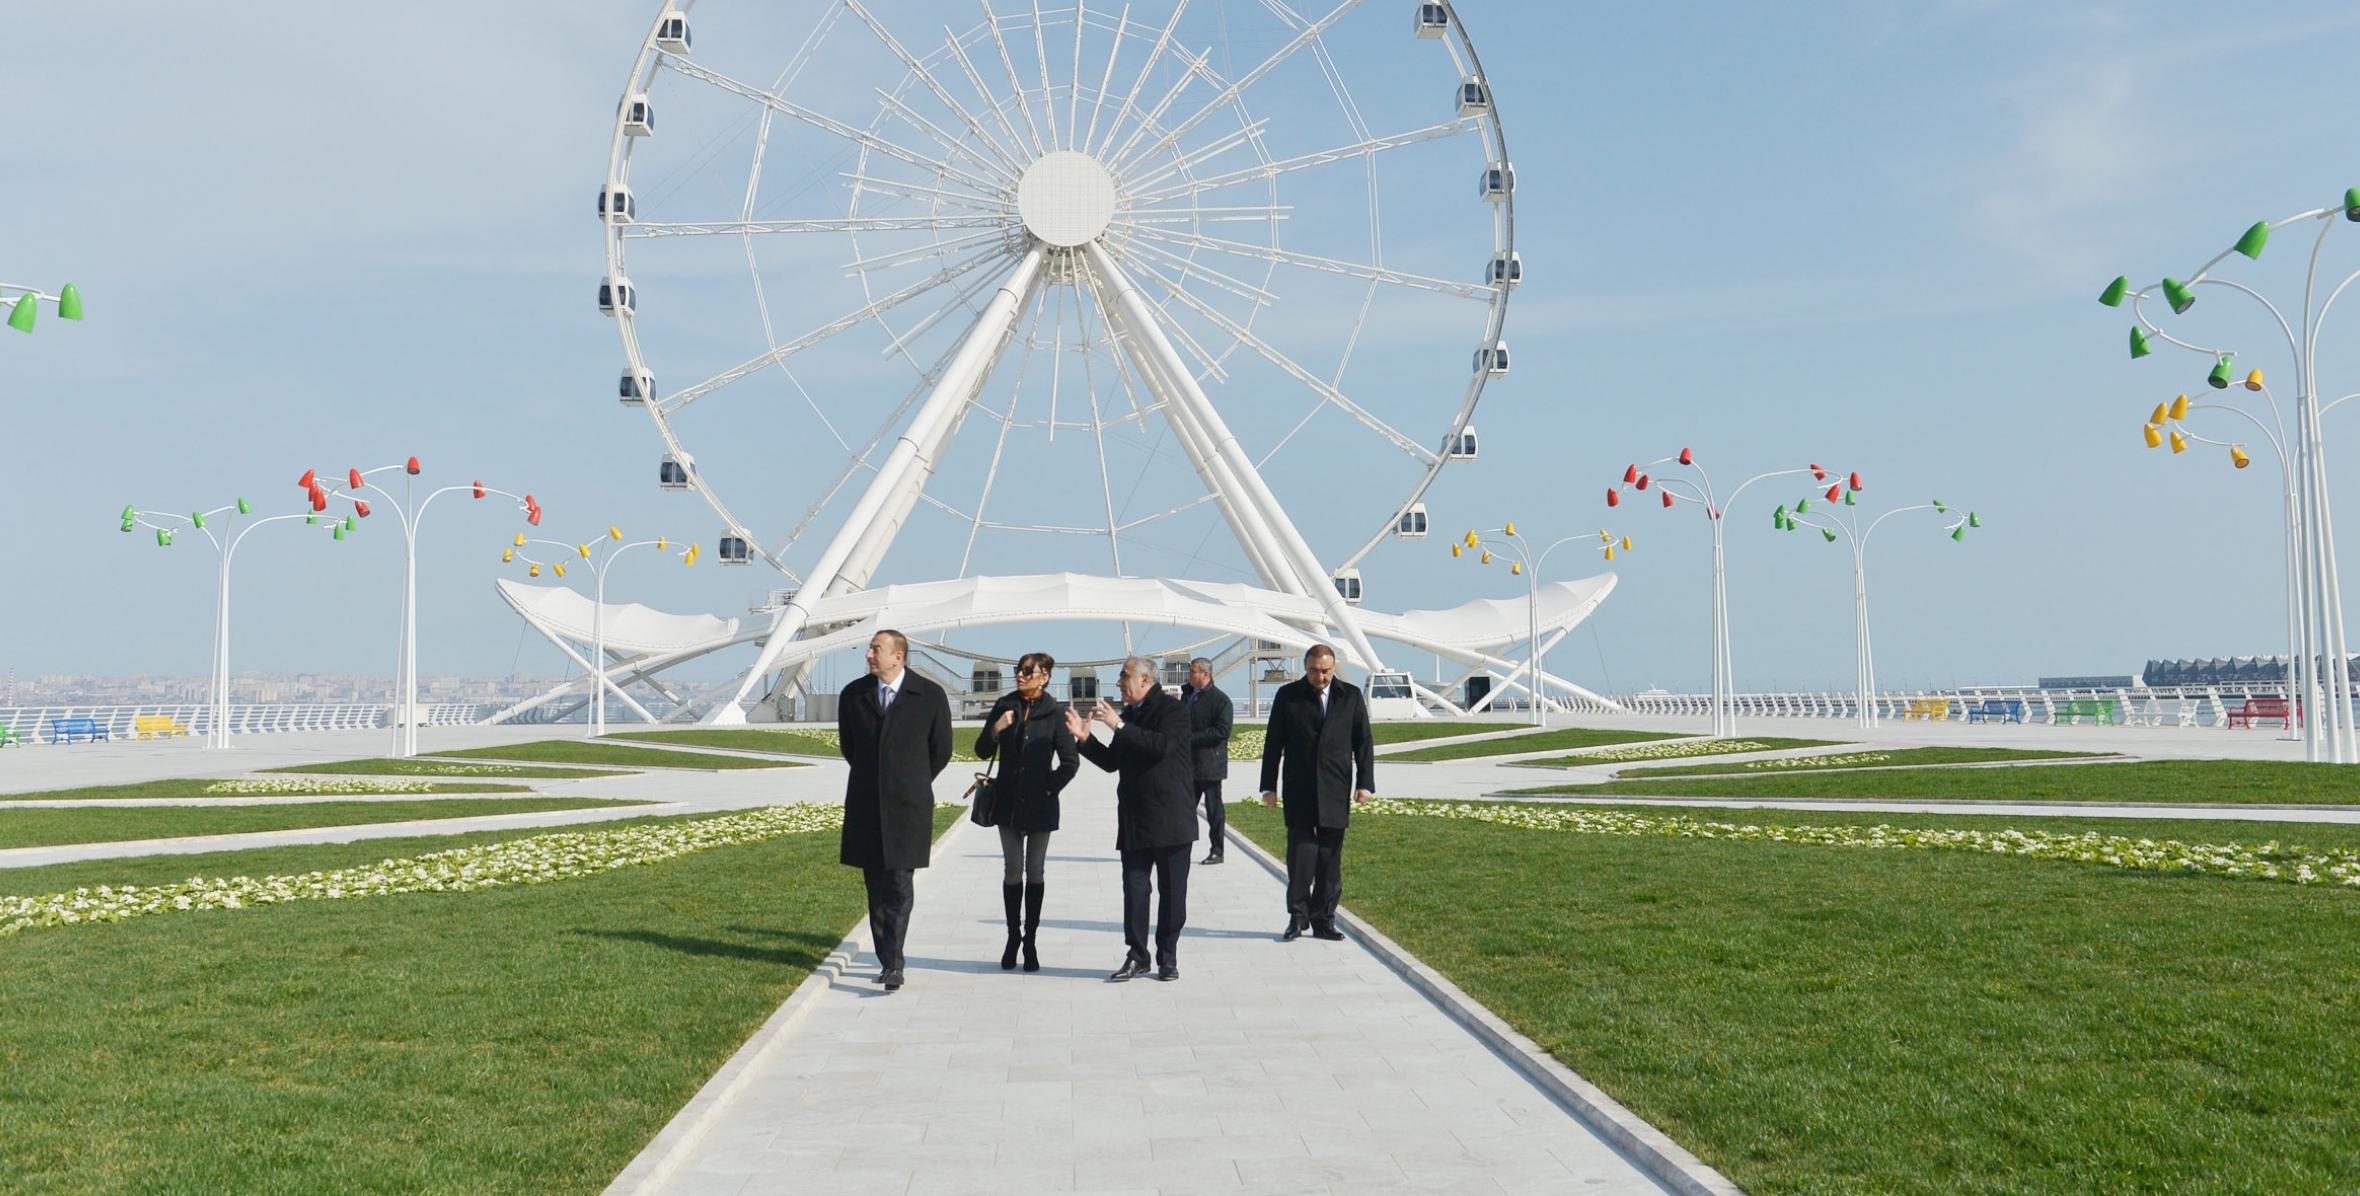 Ilham Aliyev attended the opening ceremony of a modern observation wheel in the new boulevard section of the National Seaside Park